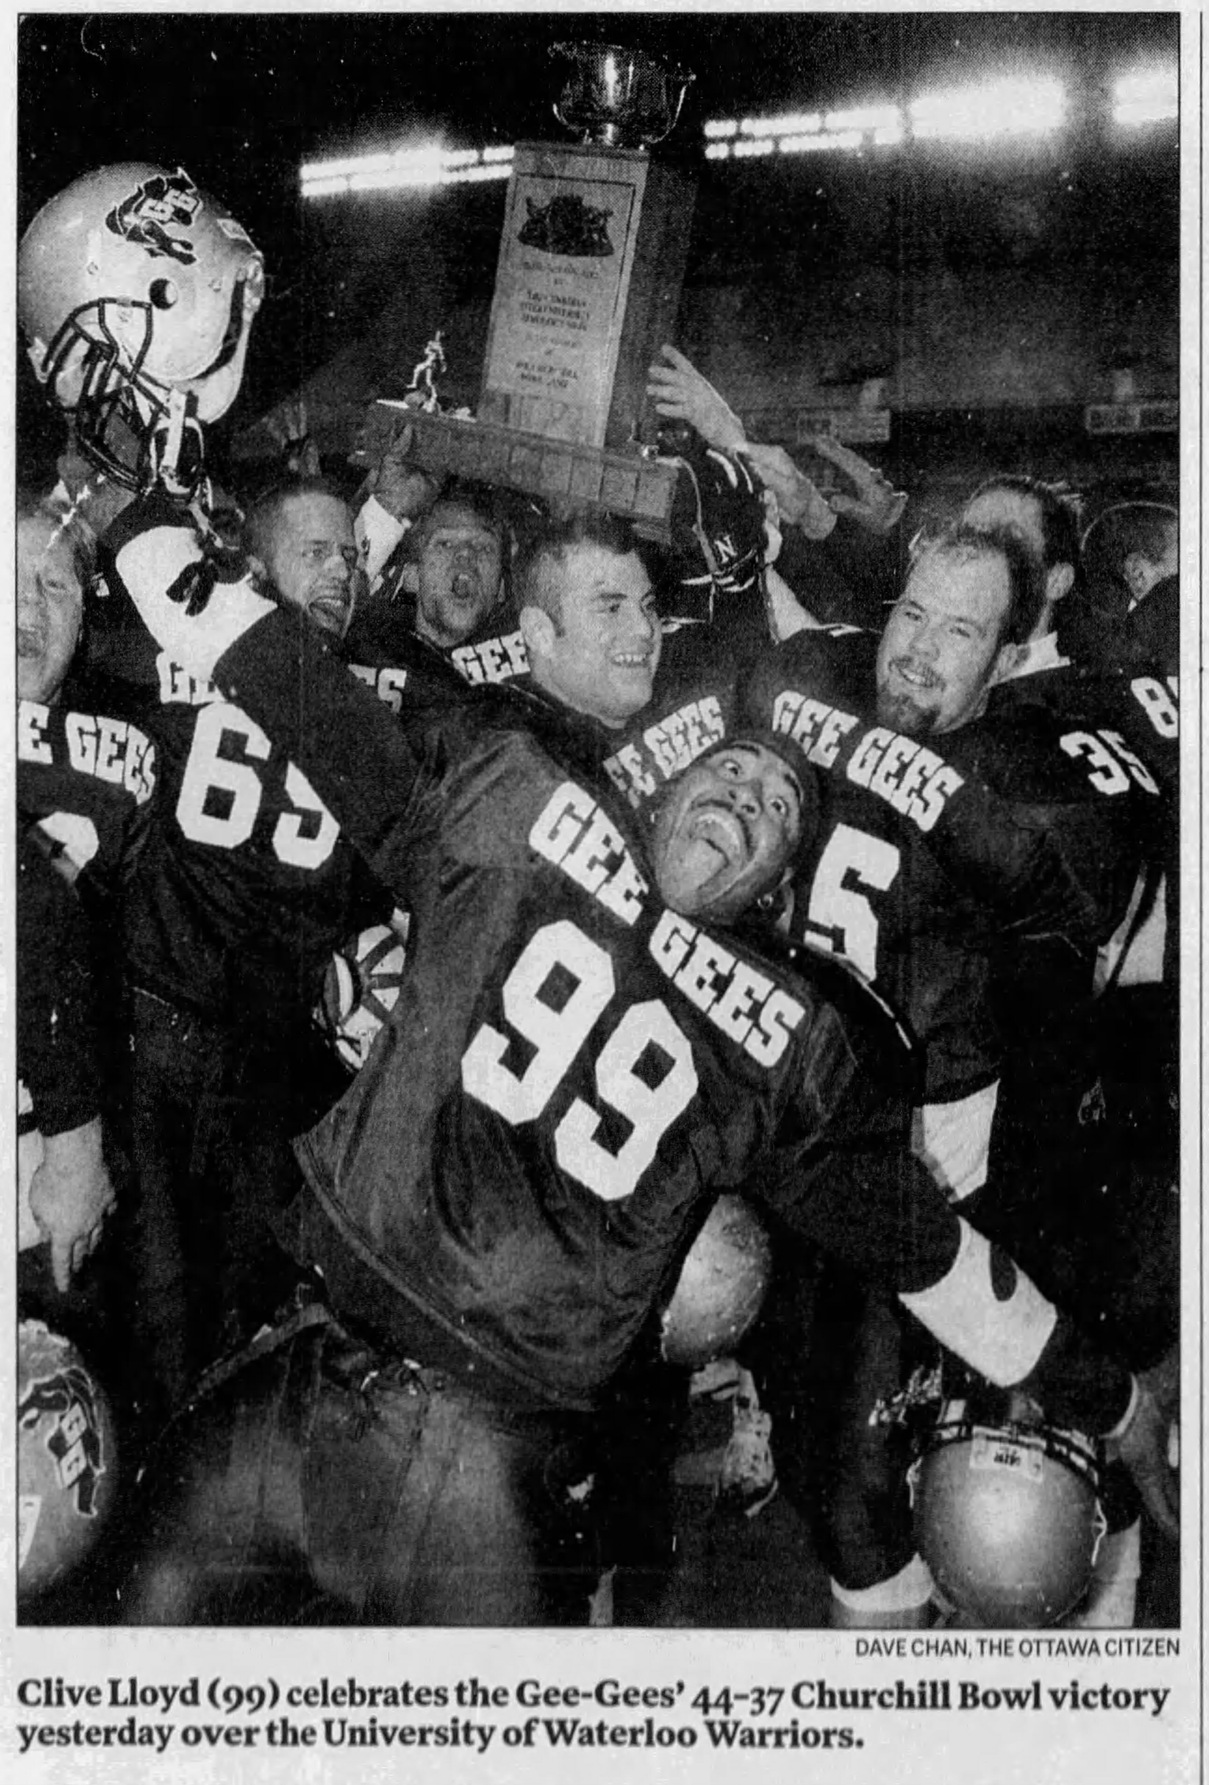 Black and white newspaper clipping with caption:Clive Lloyd (99) celebrates the Gee-Gees' 44-37 Churchill Bowl victory yesterday over the University of Waterloo Warriors. Dave Chan, the Ottawa Citizen.